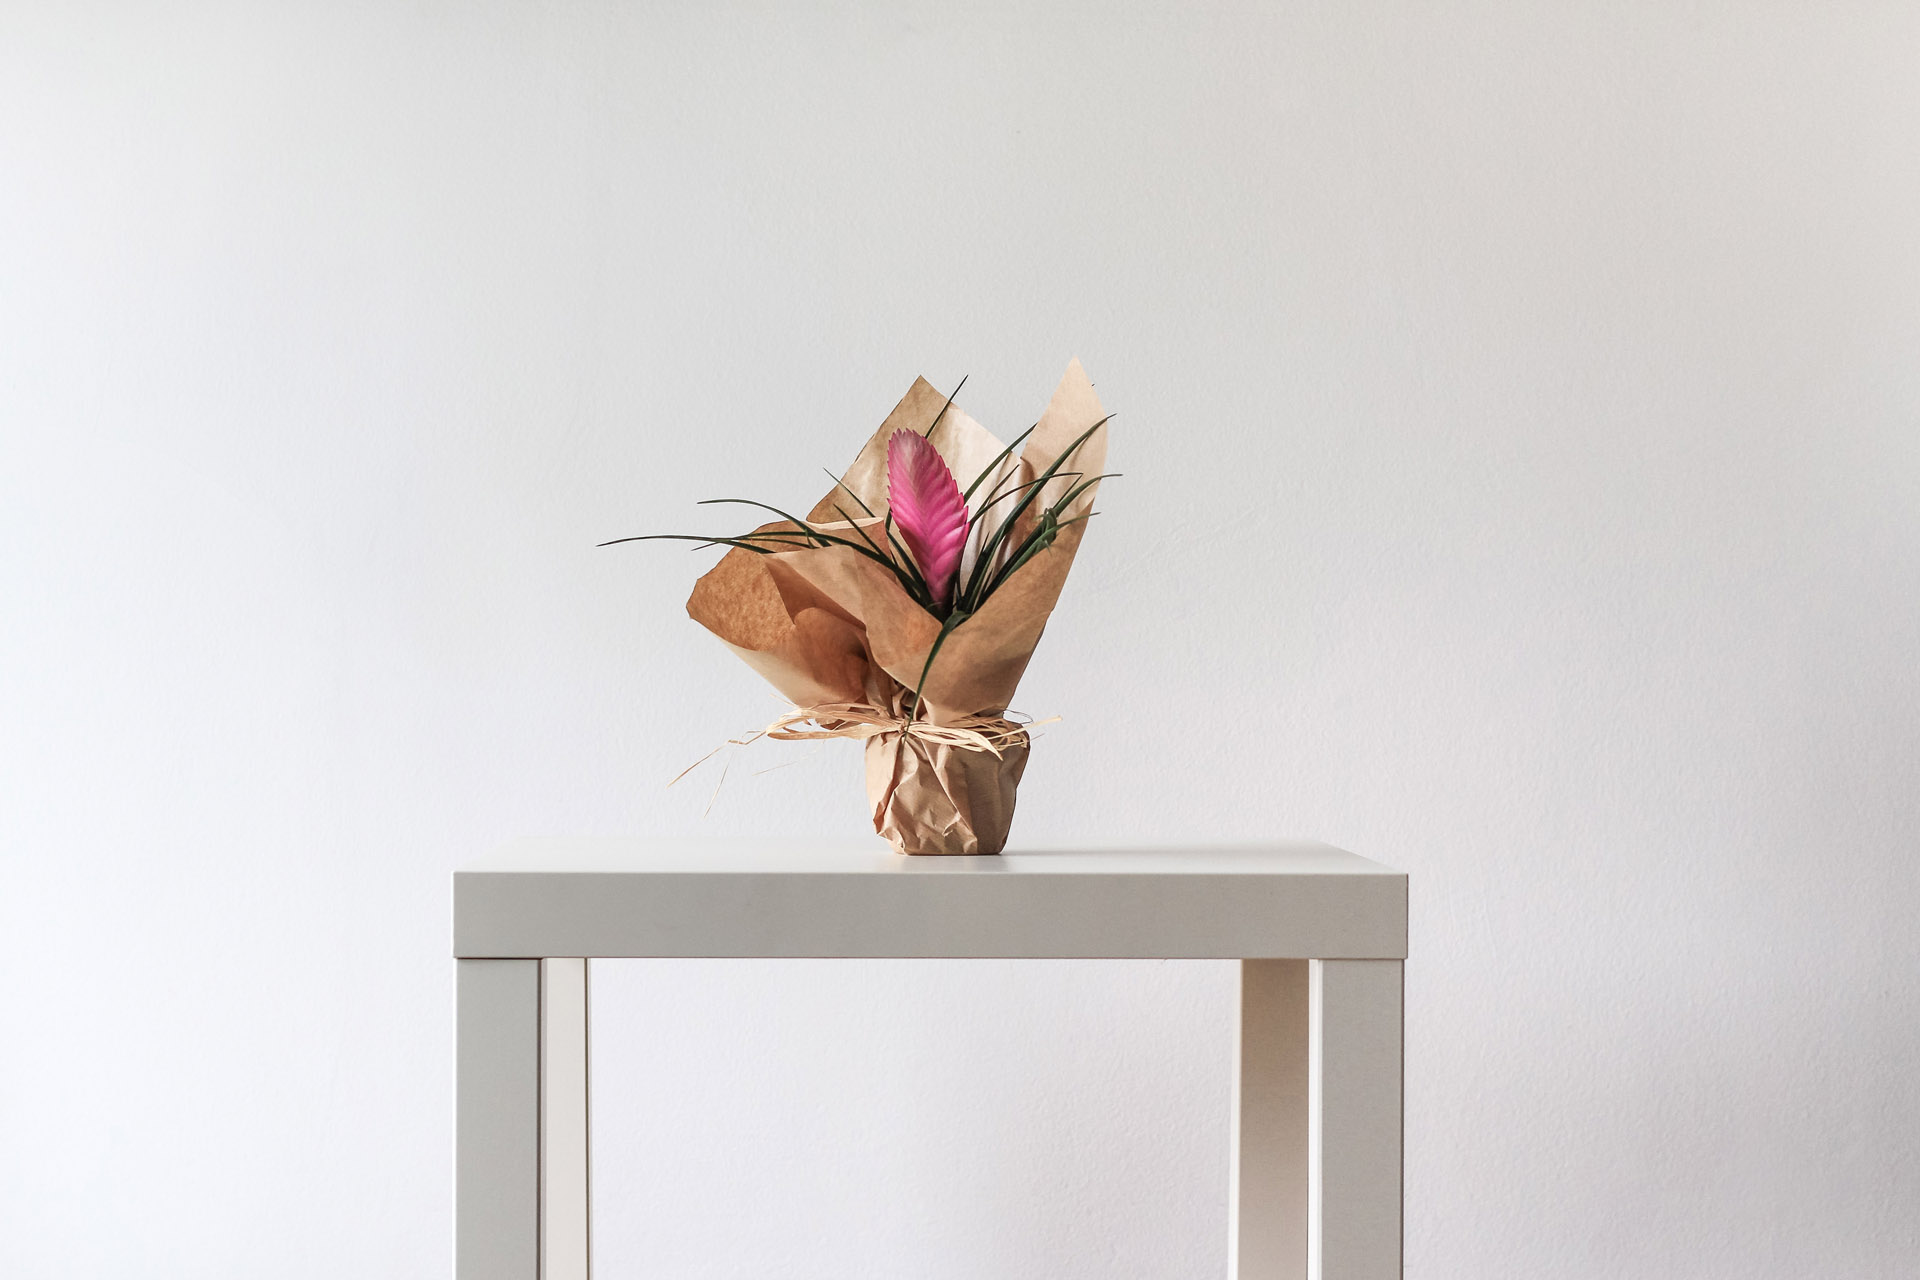 Flower on the table